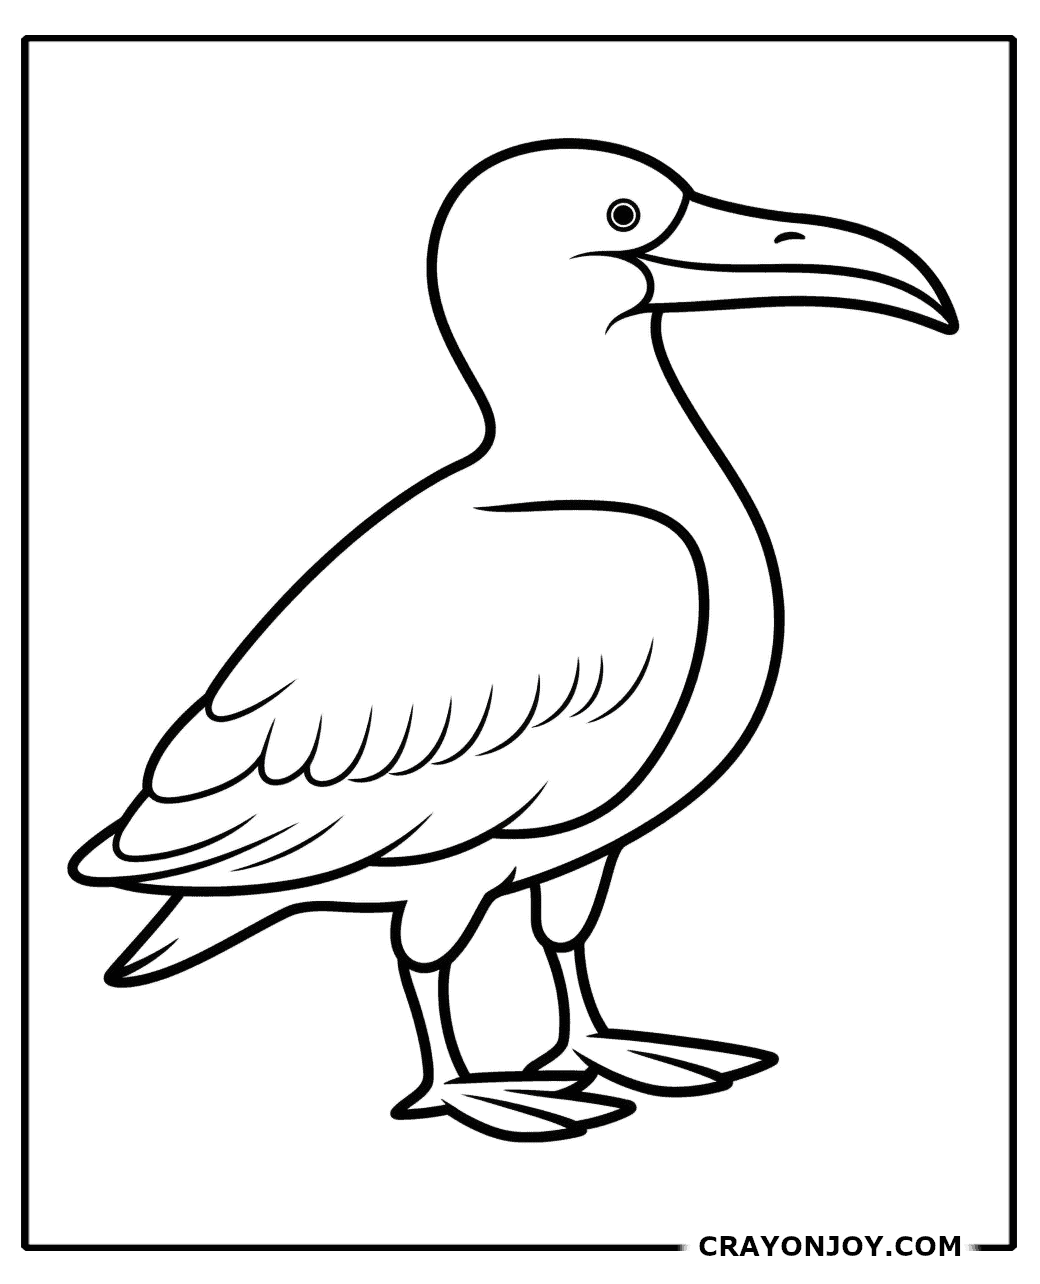 Albatross Coloring Pages: Free Printable Sheets for Kids and Adults